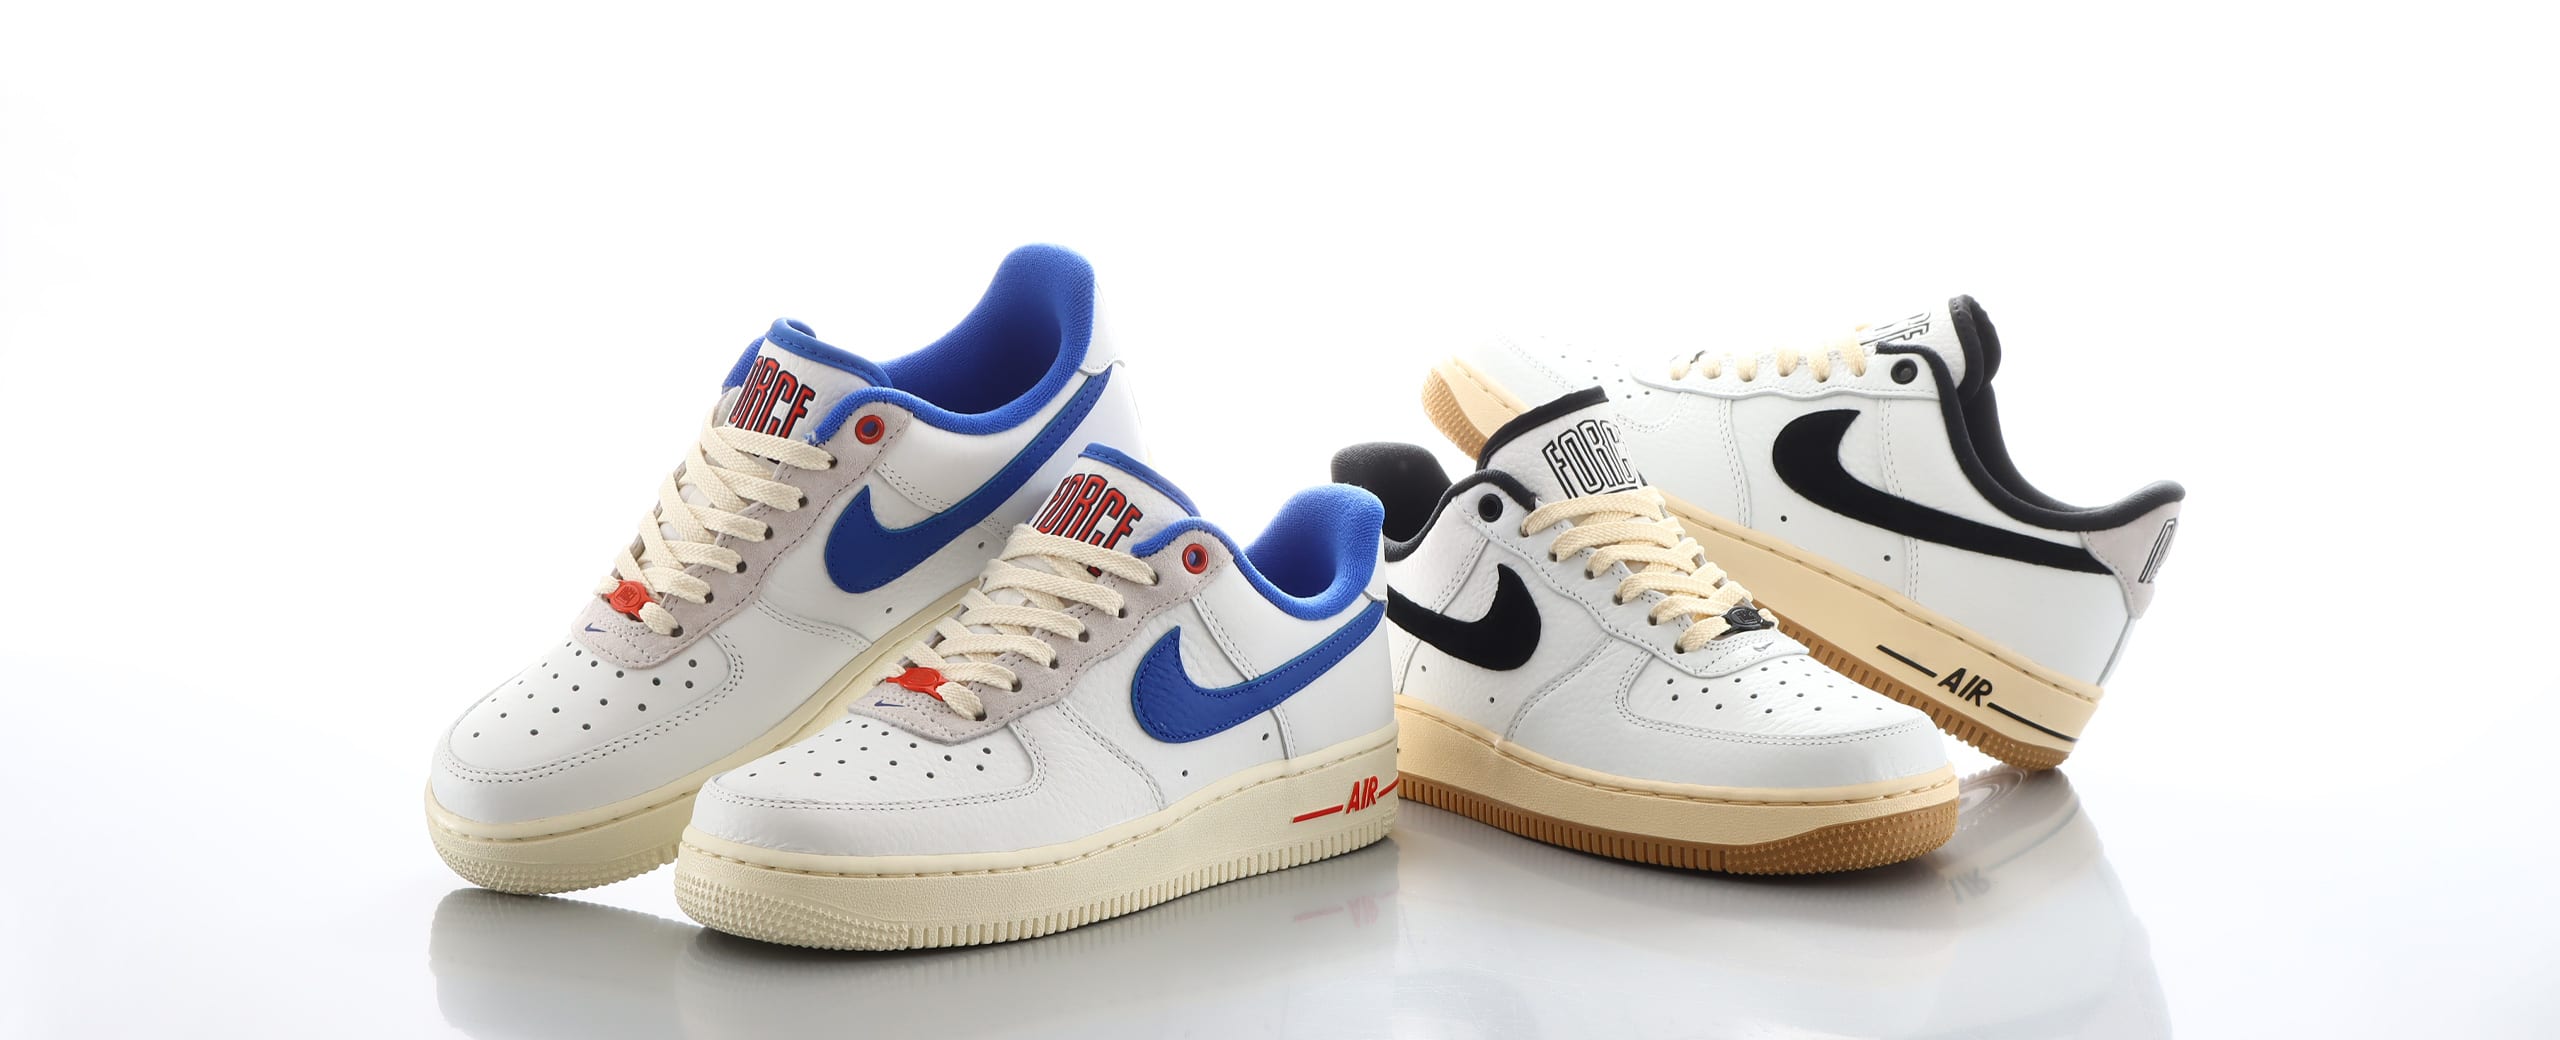 NIKE WMNS AIR FORCE 1 '07 LX SUMMIT WHITE/HYPER ROYAL-PICANTE RED 